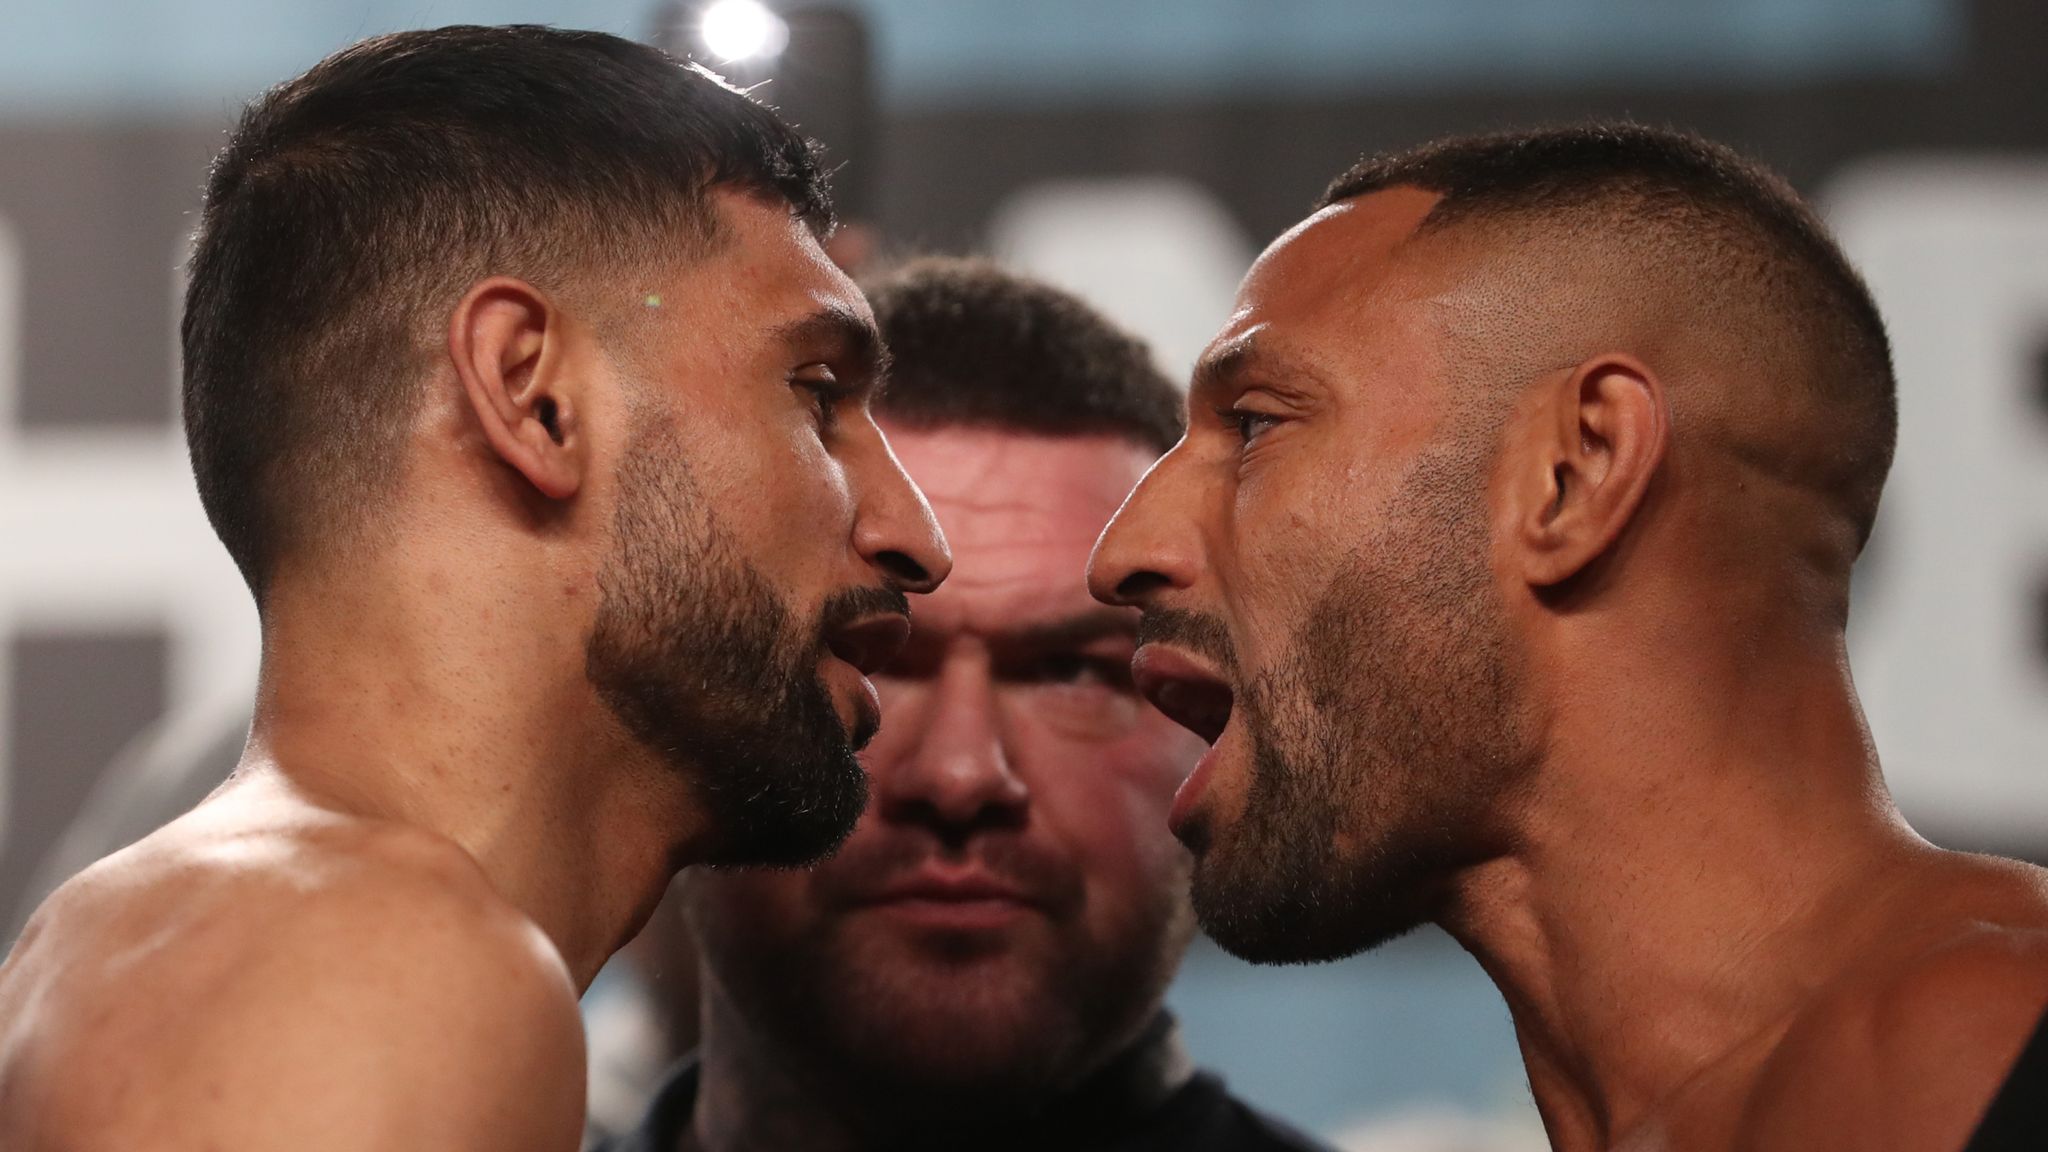 Amir Khan vs Kell Brook Predictions from boxing experts ahead of long-awaited grudge match Boxing News Sky Sports